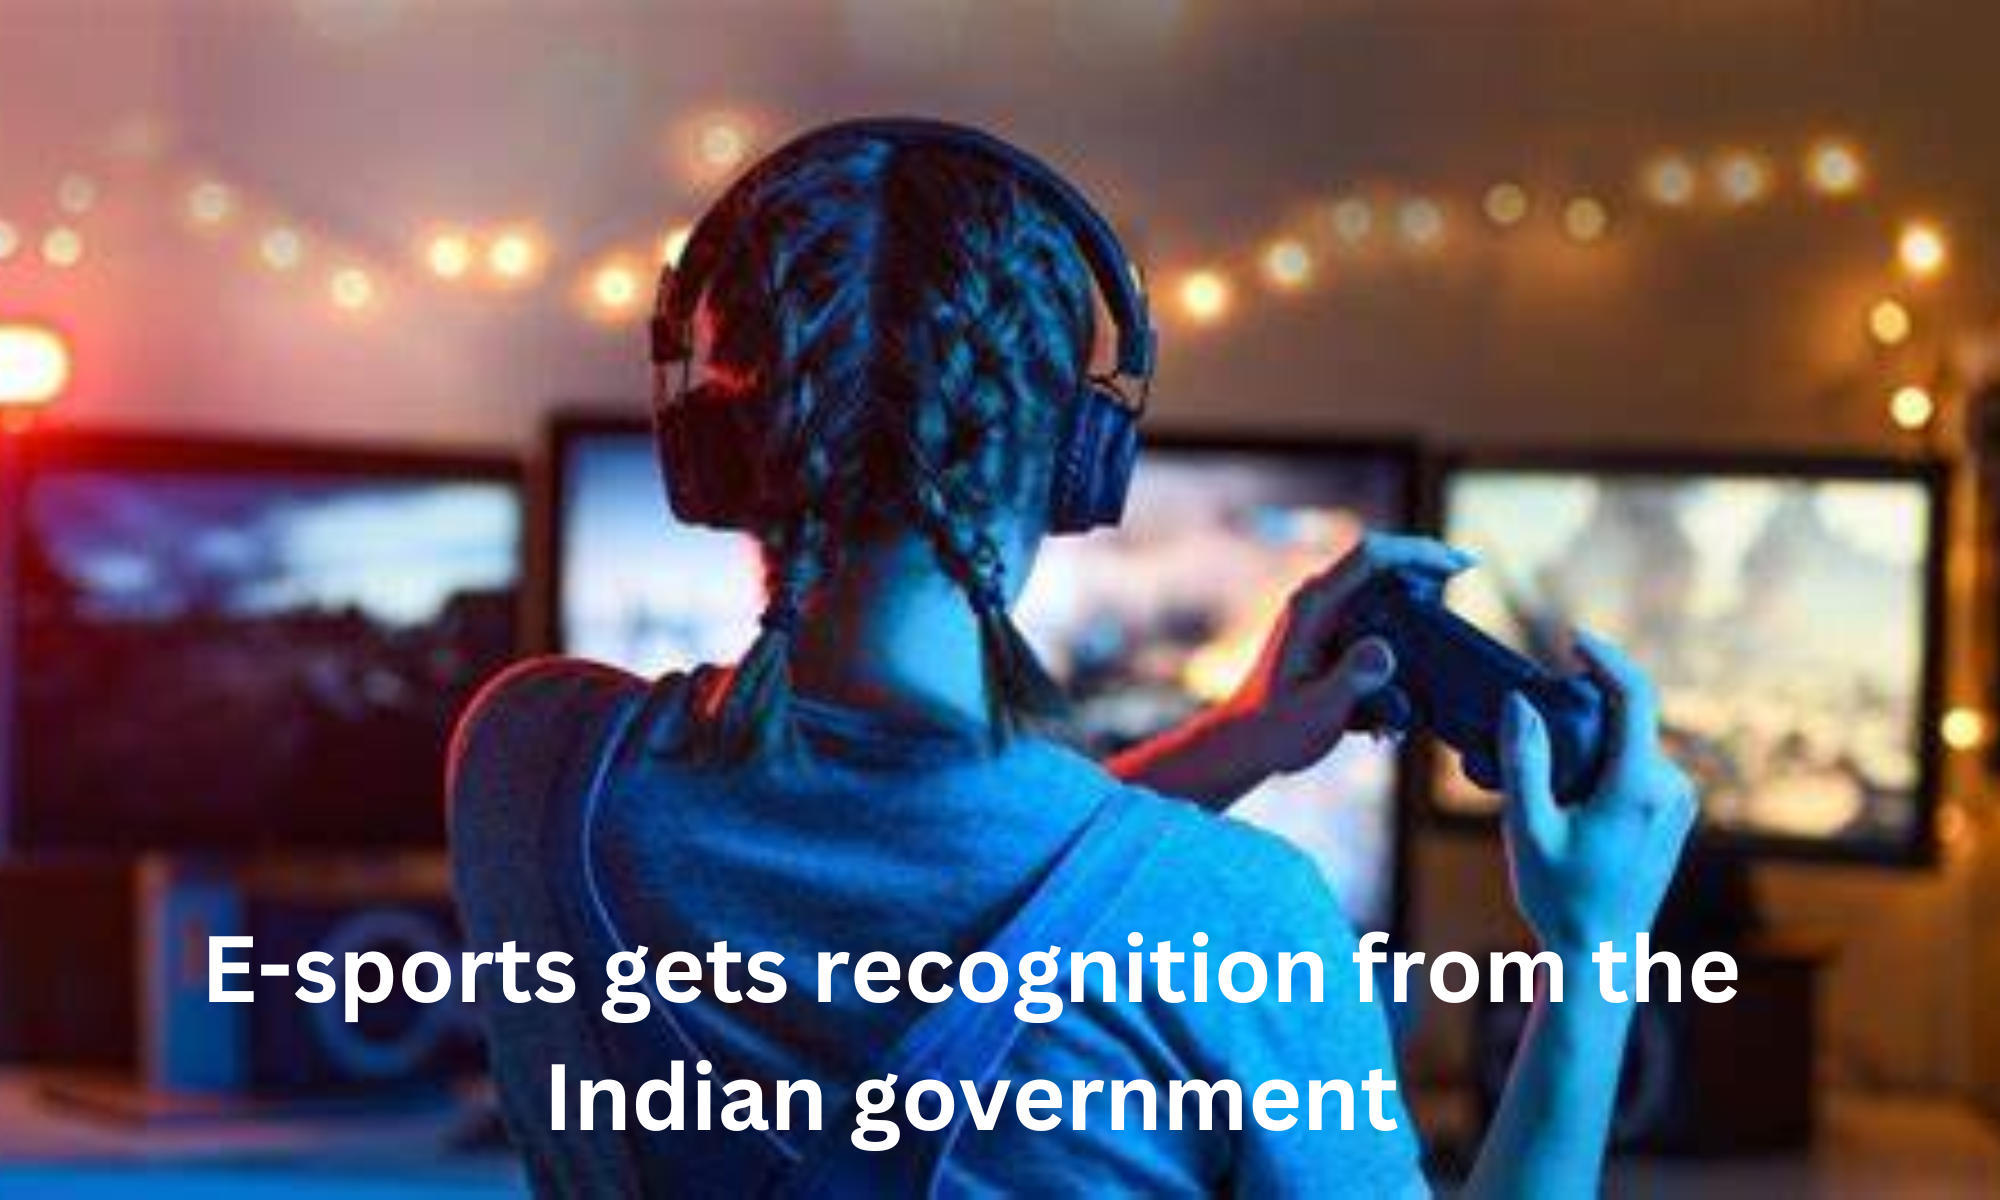 E-sports gets recognition from the Indian government as part of multisports events